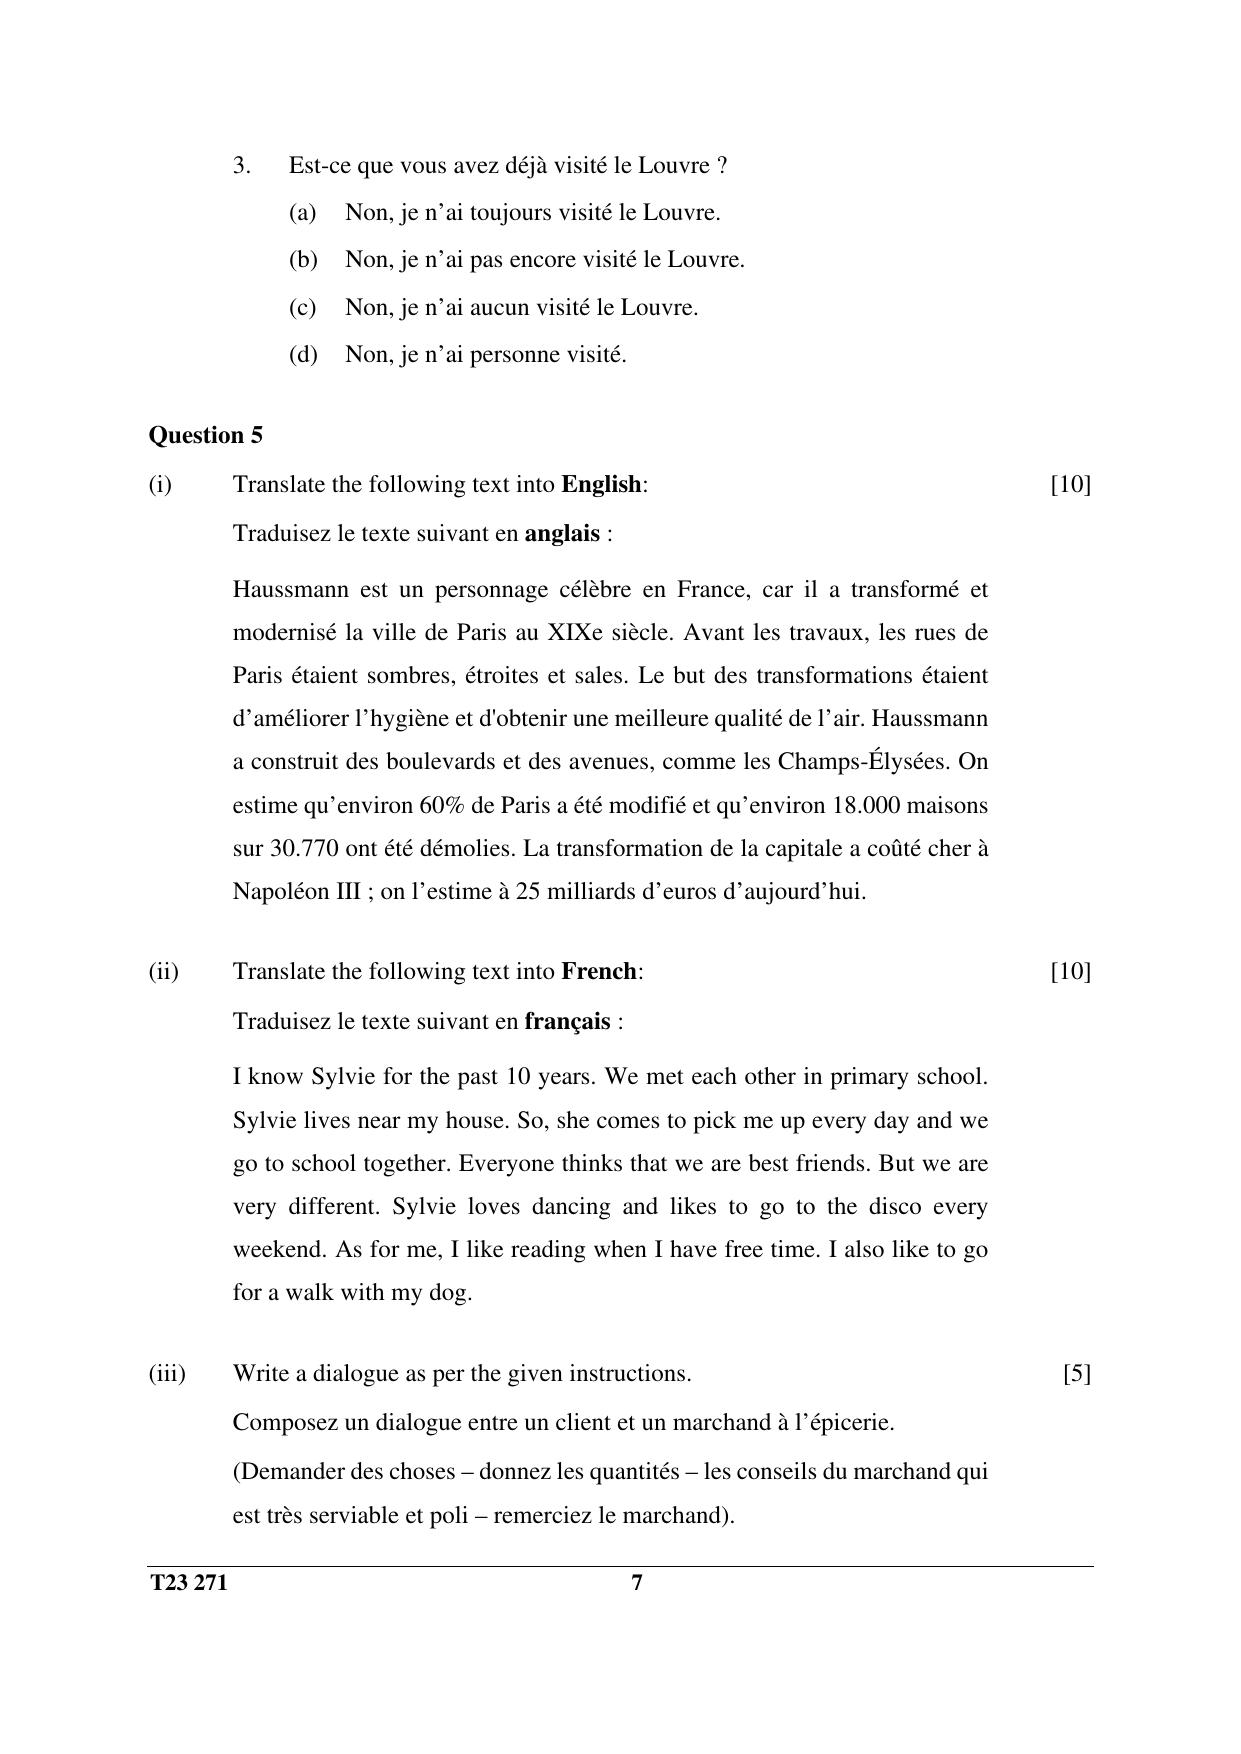 ICSE Class 10 FRENCH 2023 Question Paper - Page 7